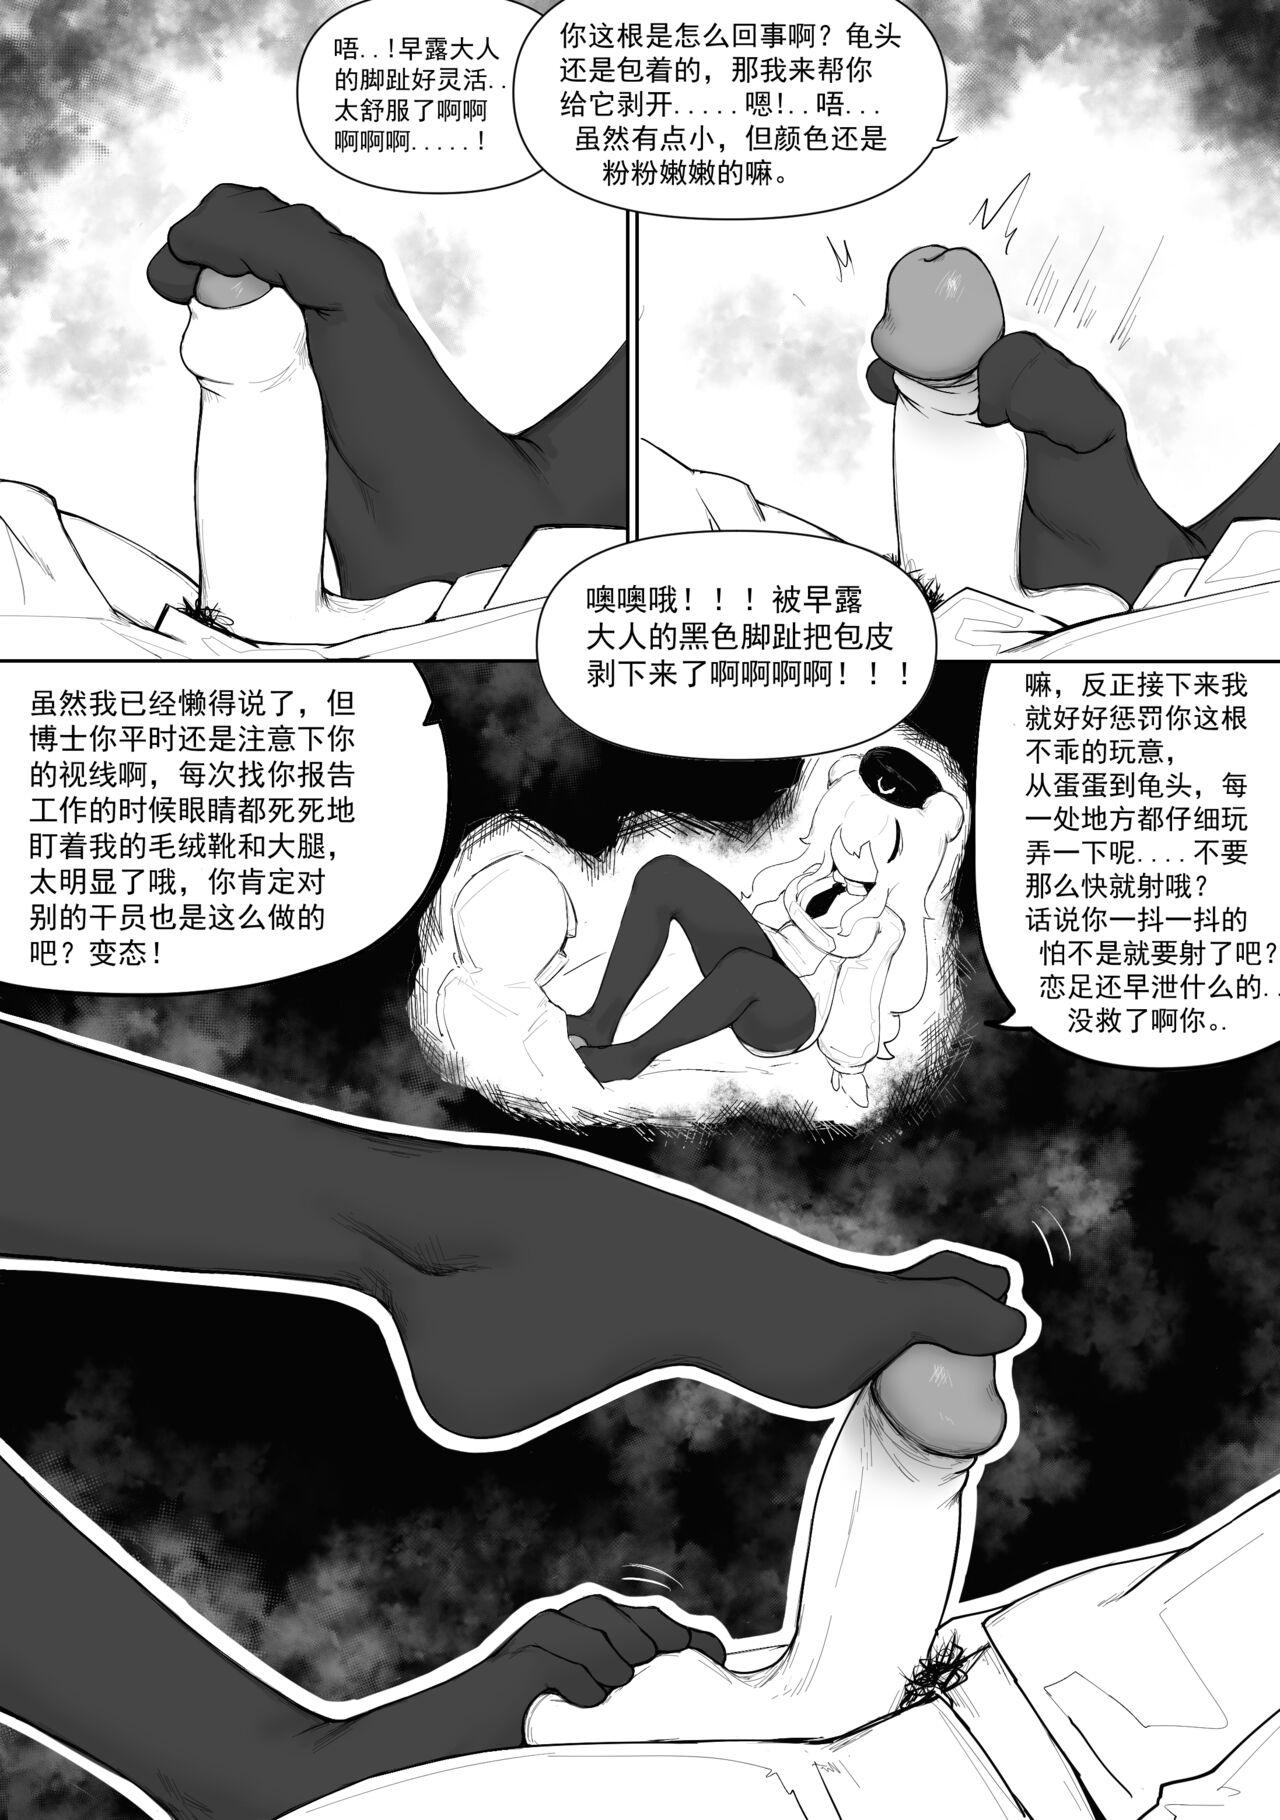 Nasty 澄澈之冰 早露 - Arknights Girlfriend - Page 5